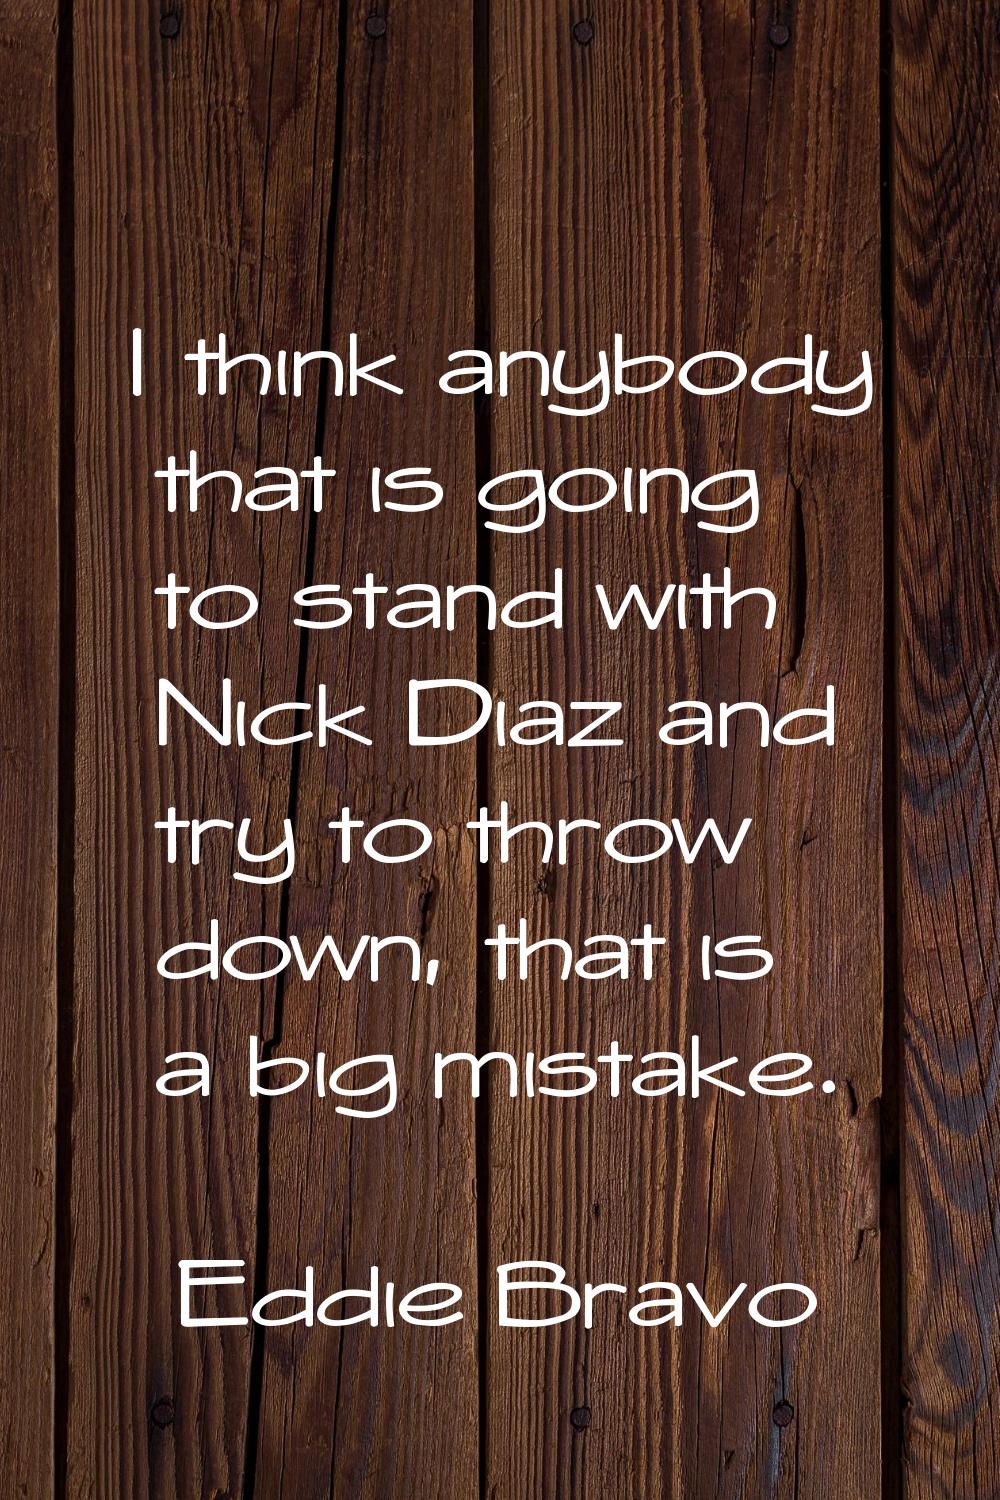 I think anybody that is going to stand with Nick Diaz and try to throw down, that is a big mistake.